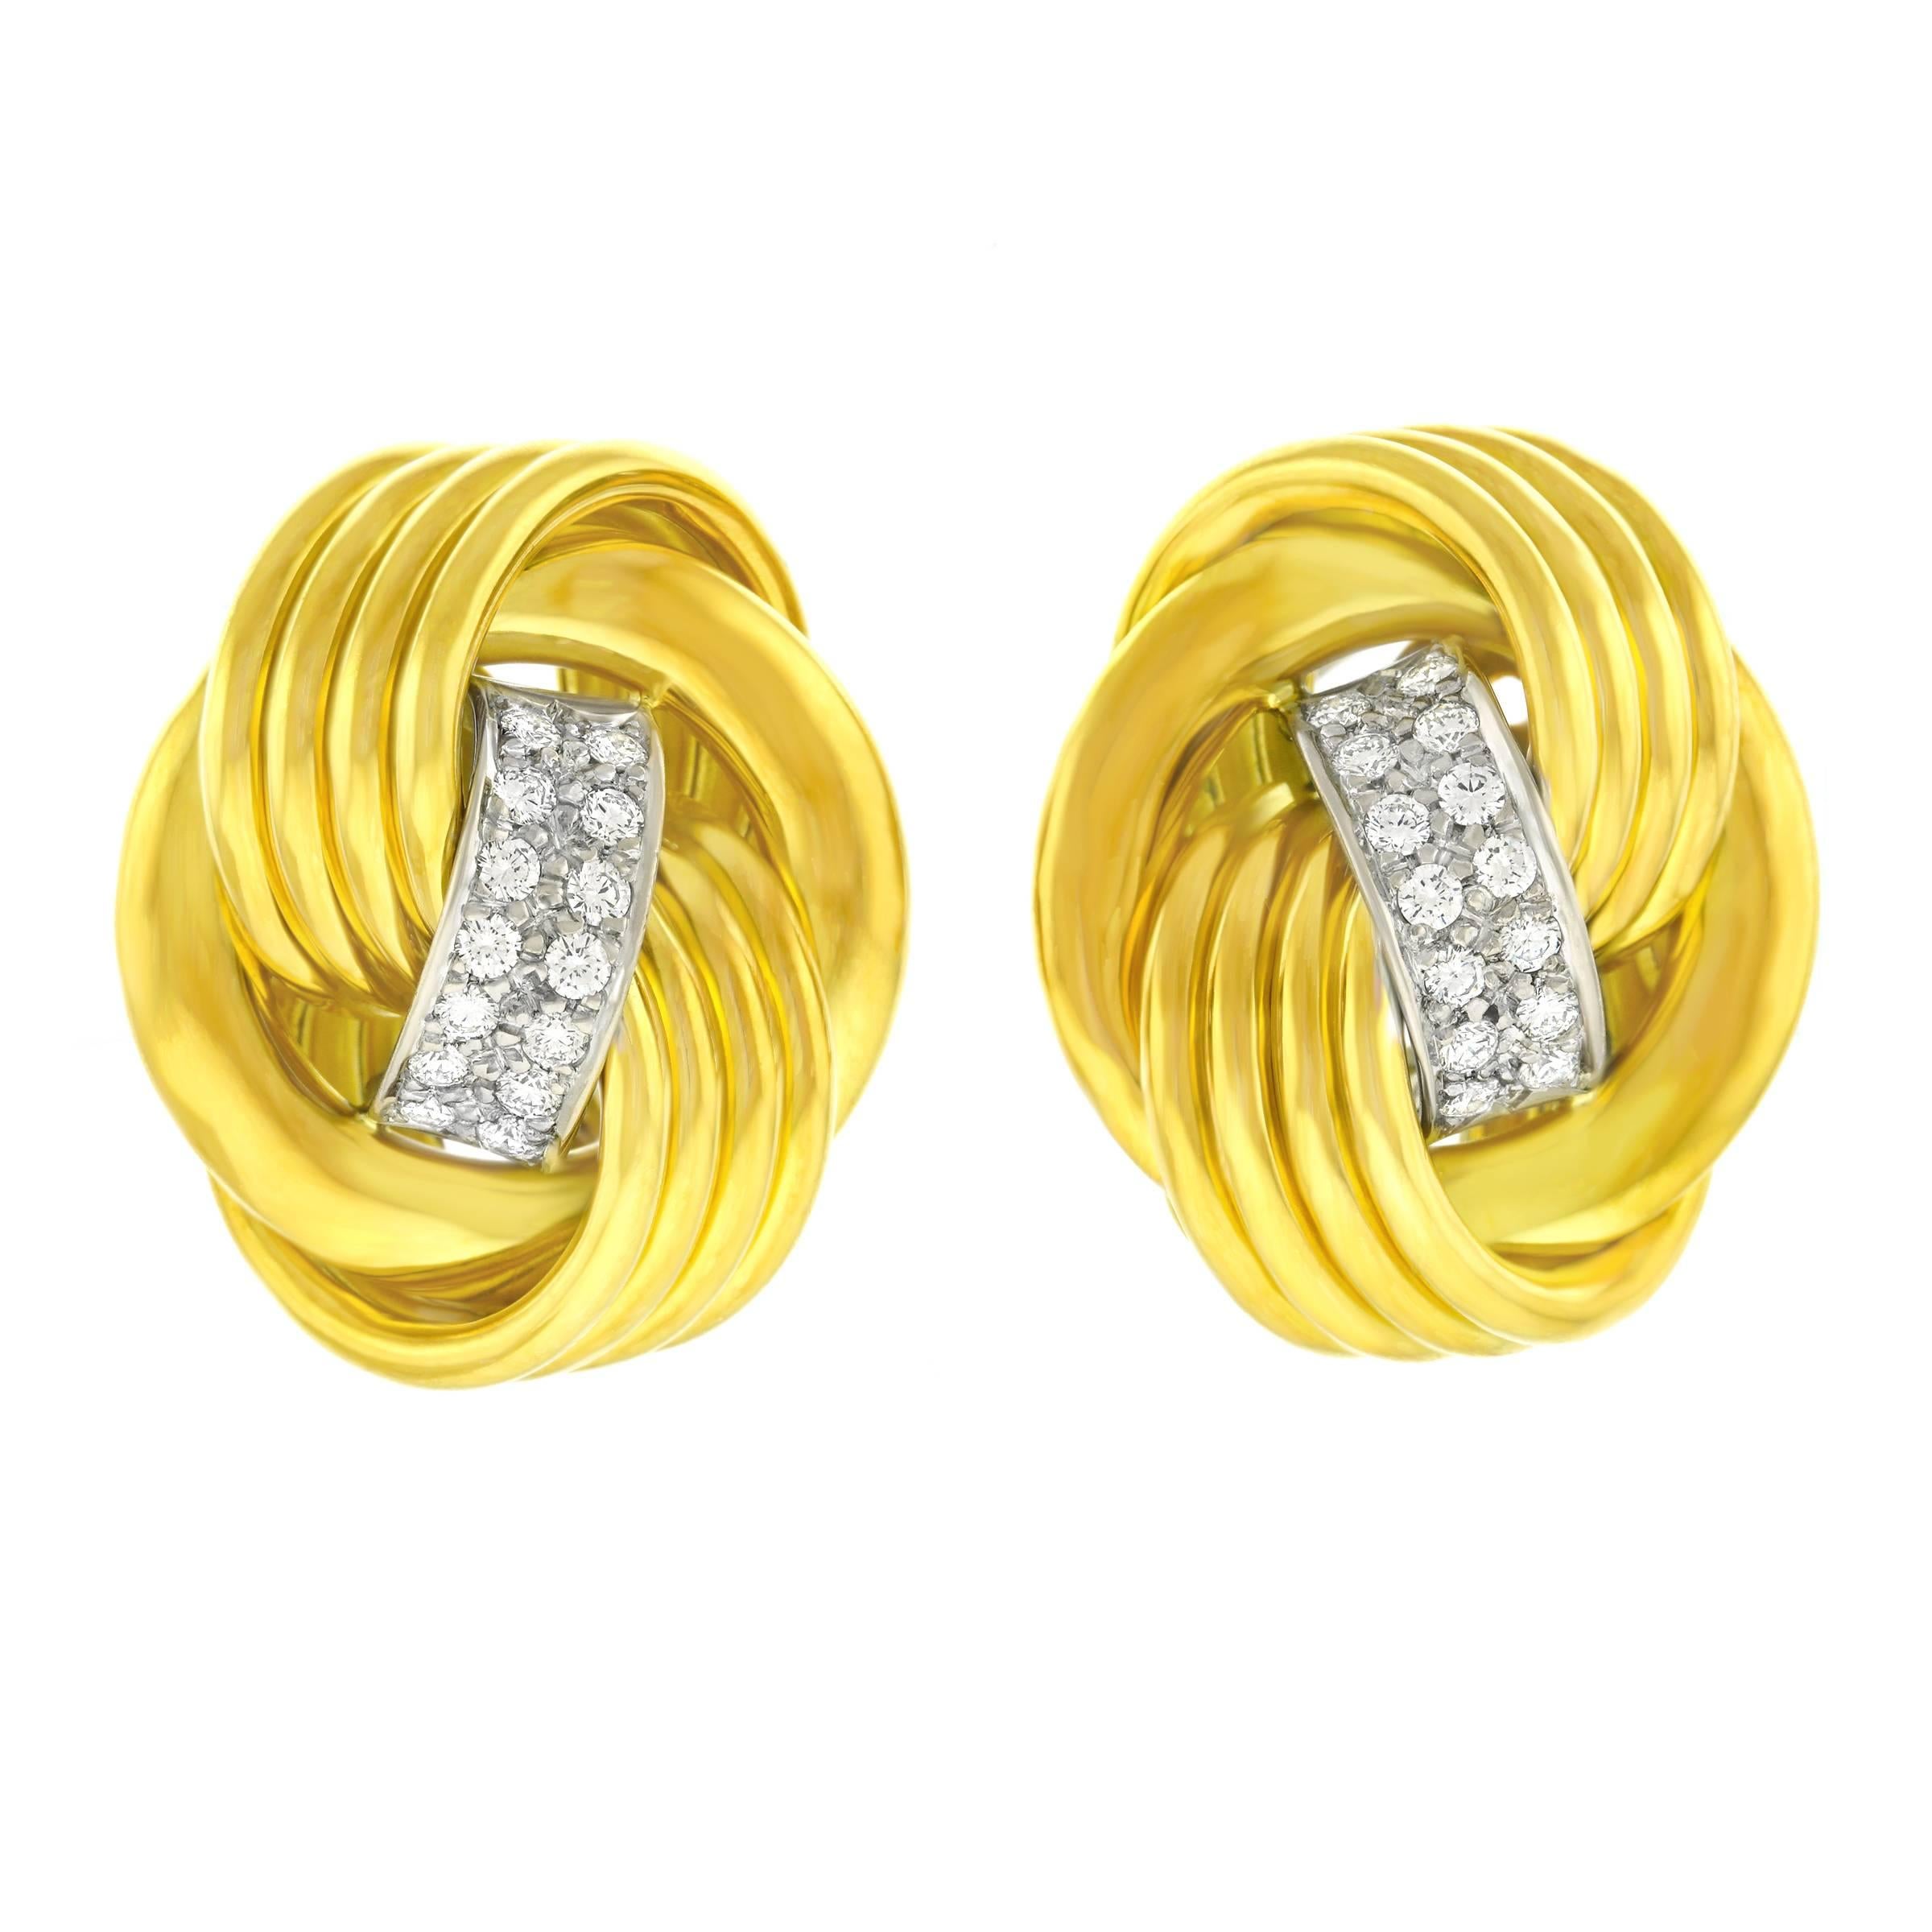 Meister Gold and Diamond Knot Earrings